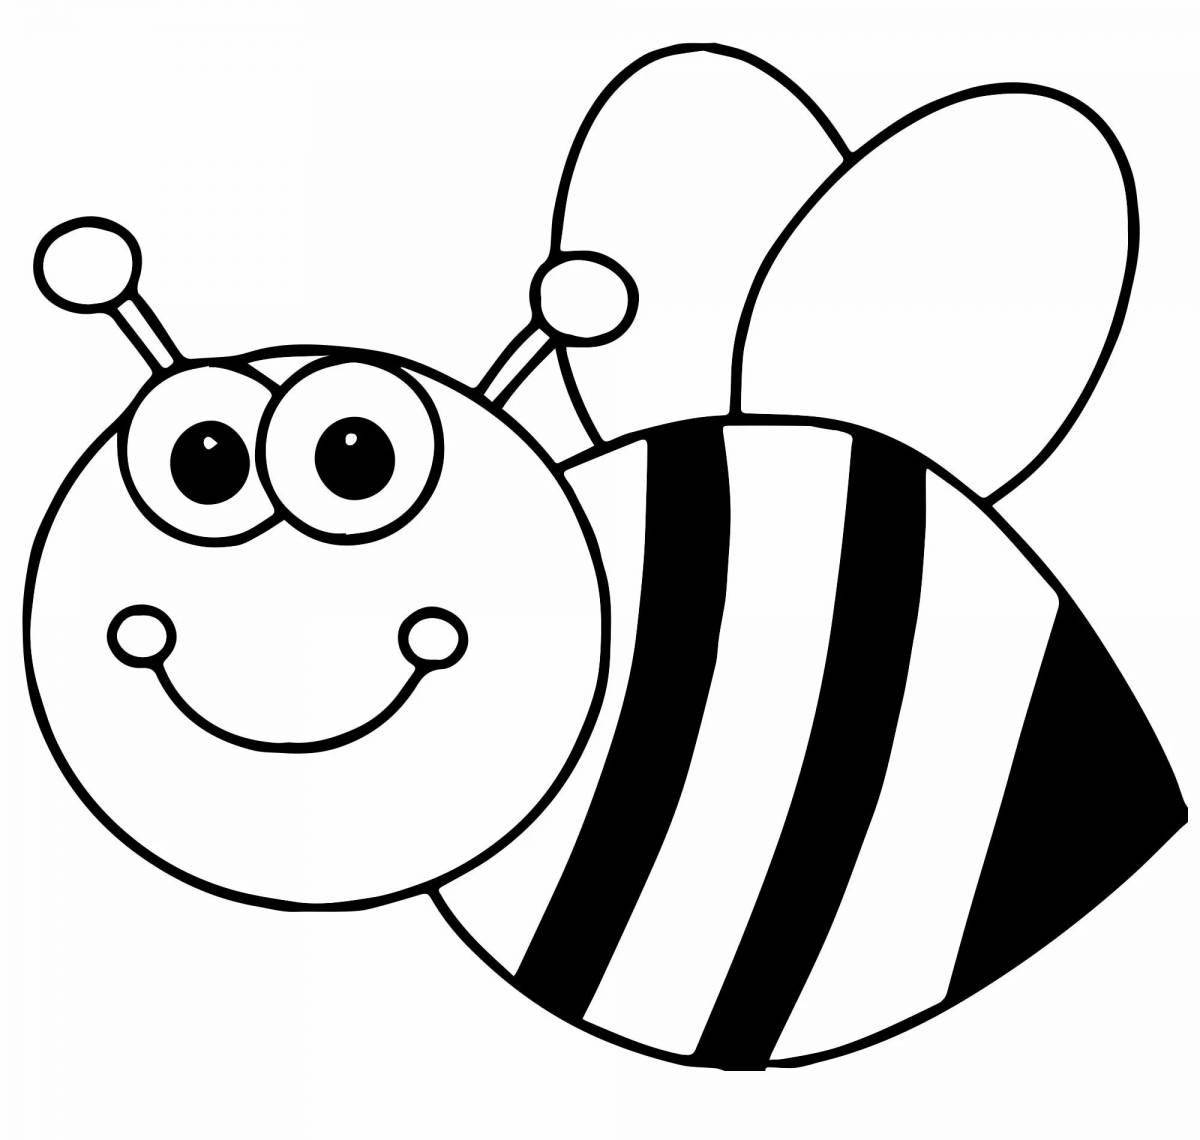 Innovative beekeeper coloring page